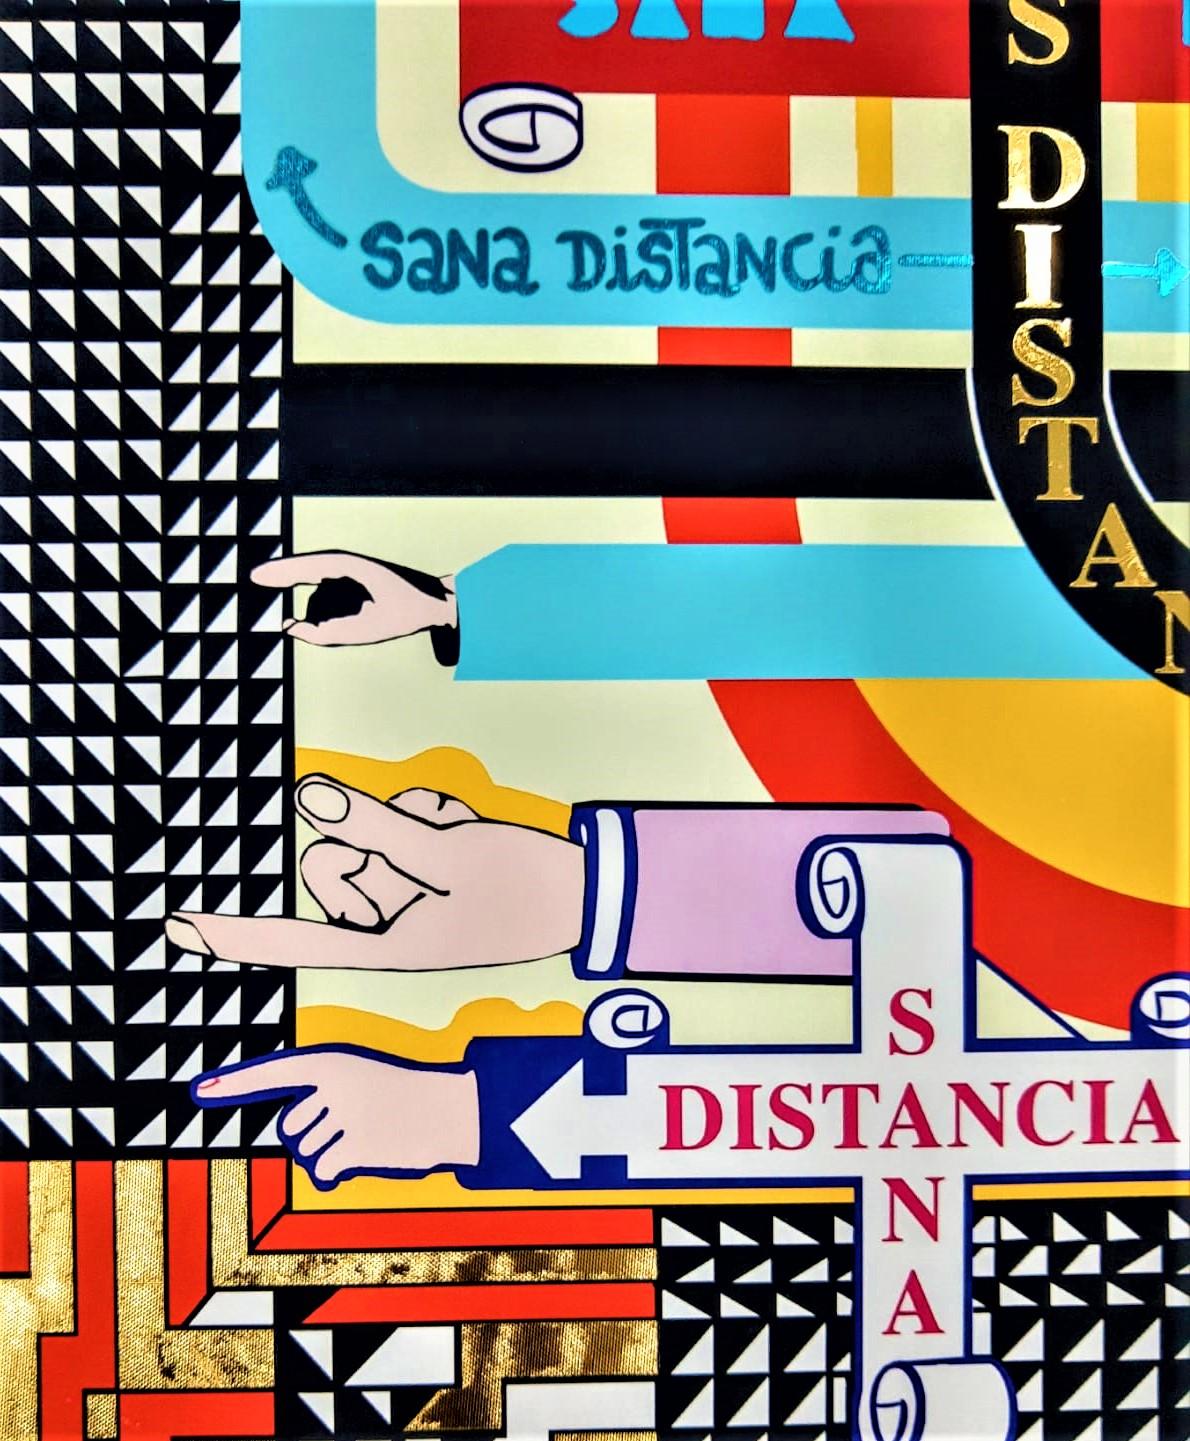 During the pandemic, the artist stayed for 4 months in Oaxaca on a beach called San Aguistinillo, where he developed the Sana Distancia (safe distance) collection, he created each day during the pandemic a new piece where he transmitted his current